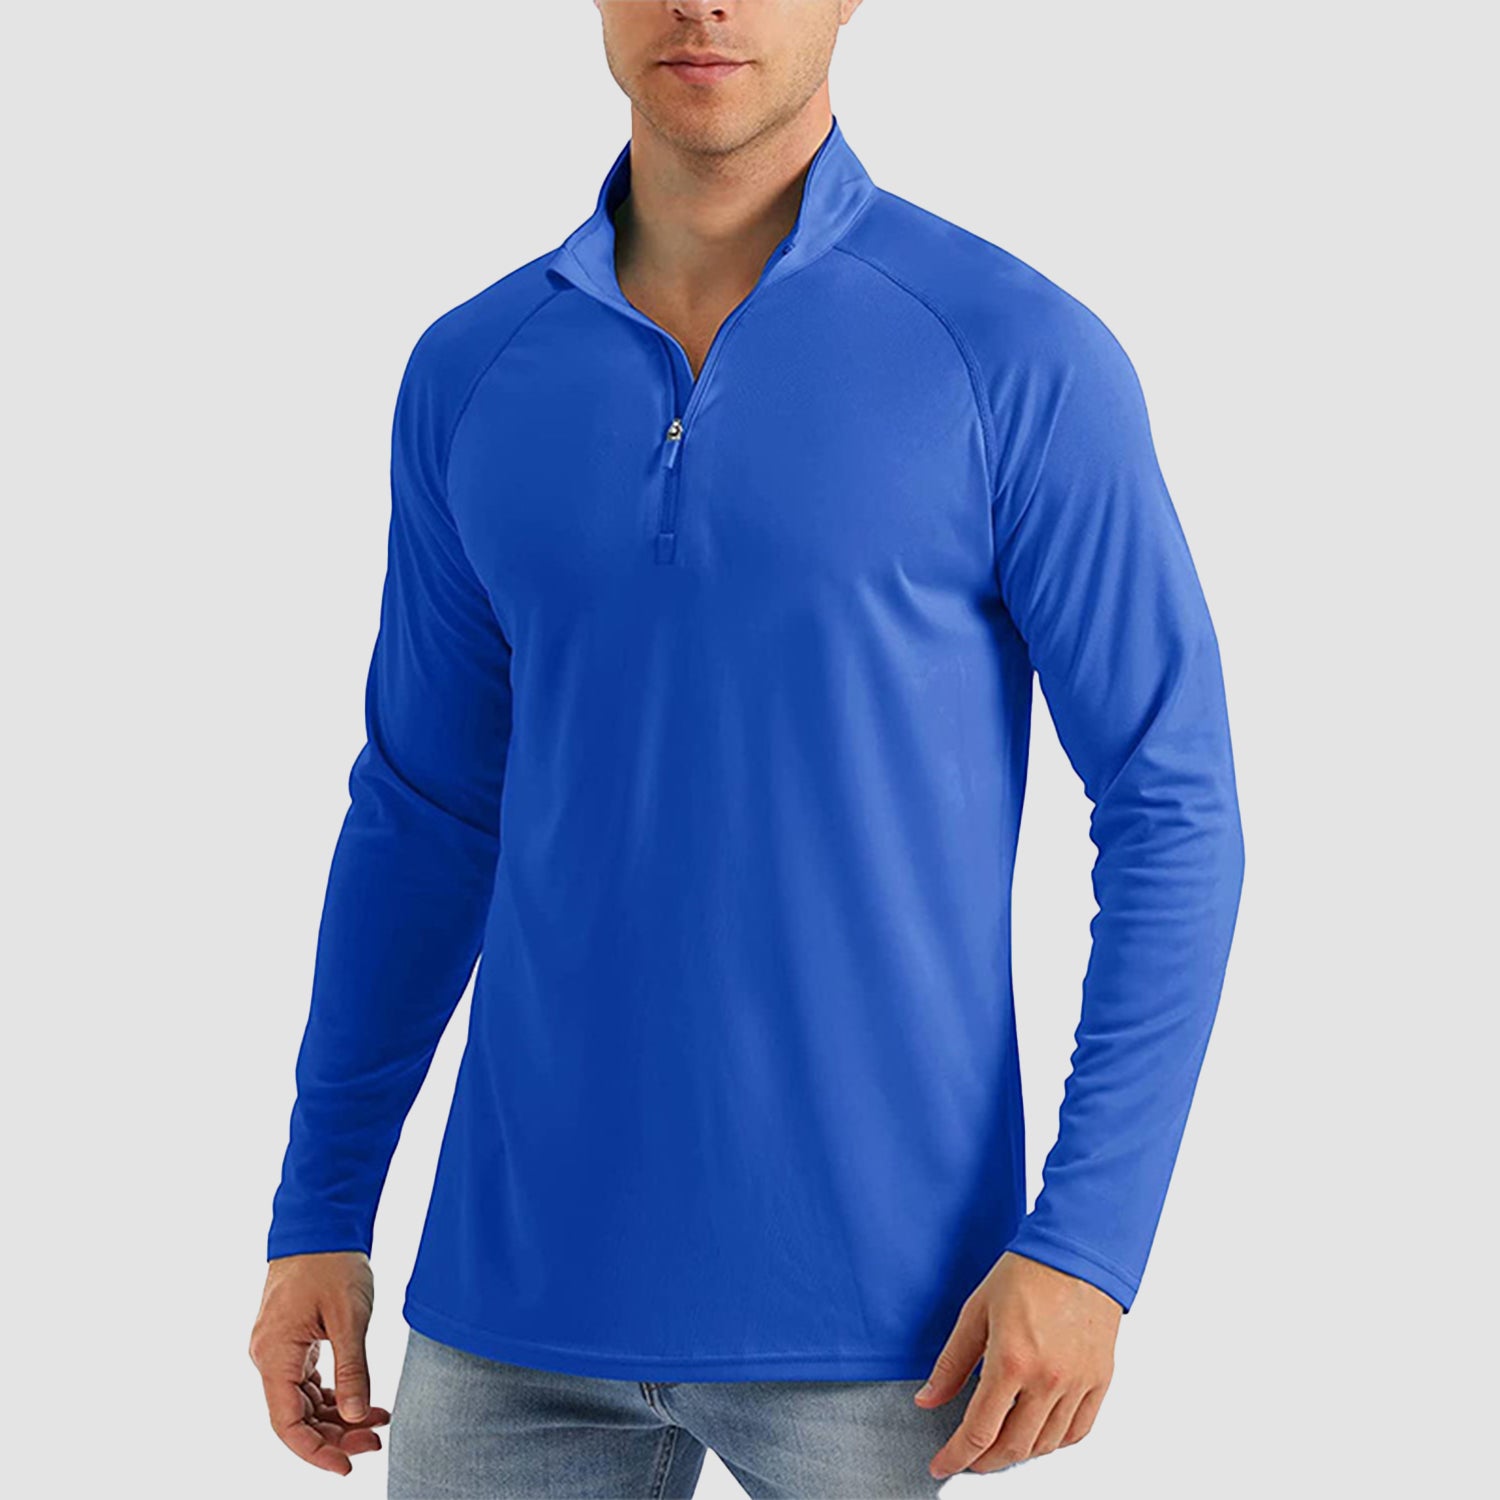 Men's Long Sleeve Shirt UPF 50 Quick Dry for Outdoor Sports